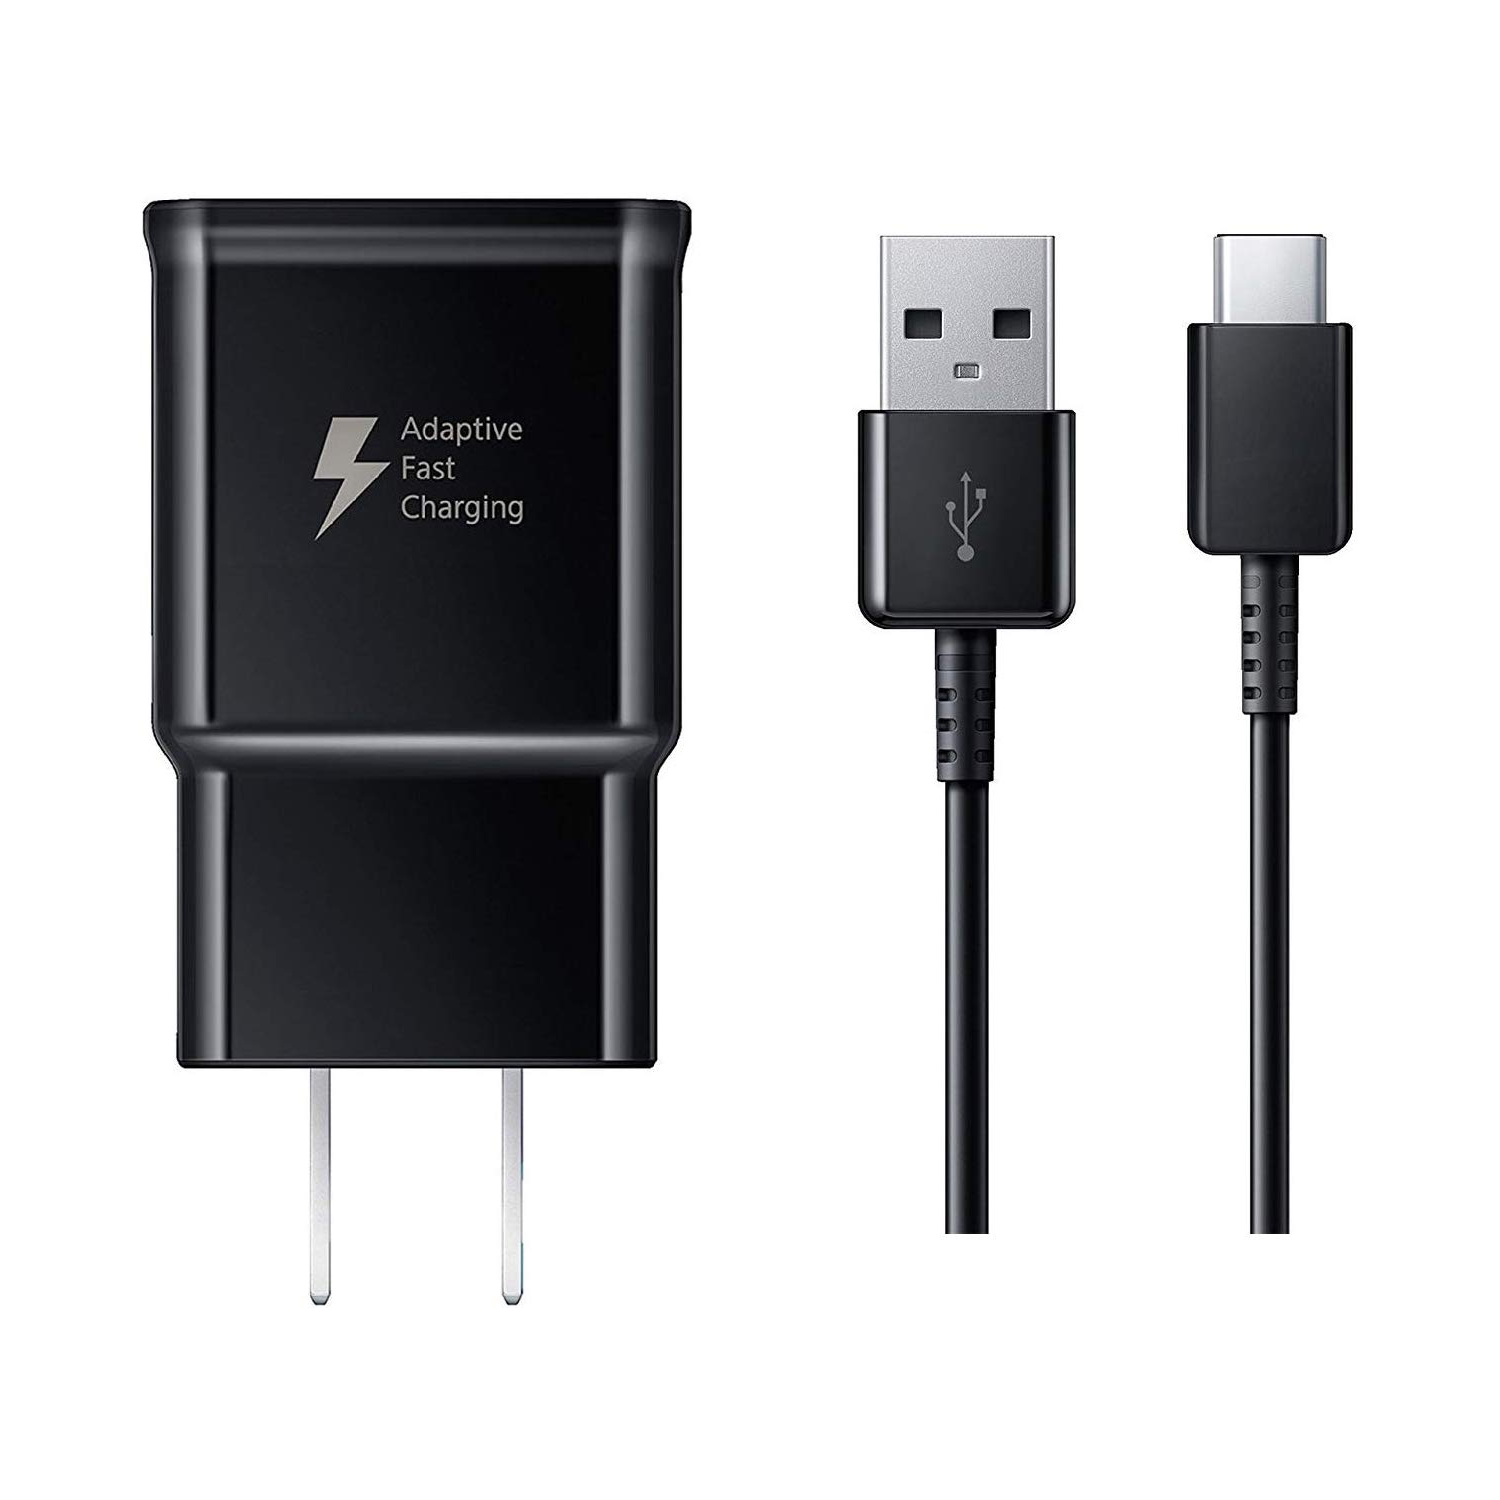 ( 2 PACKS ) Samsung Galaxy Fast Adaptive Charging Wall Charger + Type USB C Cable for Galaxy S8 S9 S10 Note 8 9 - BLACK